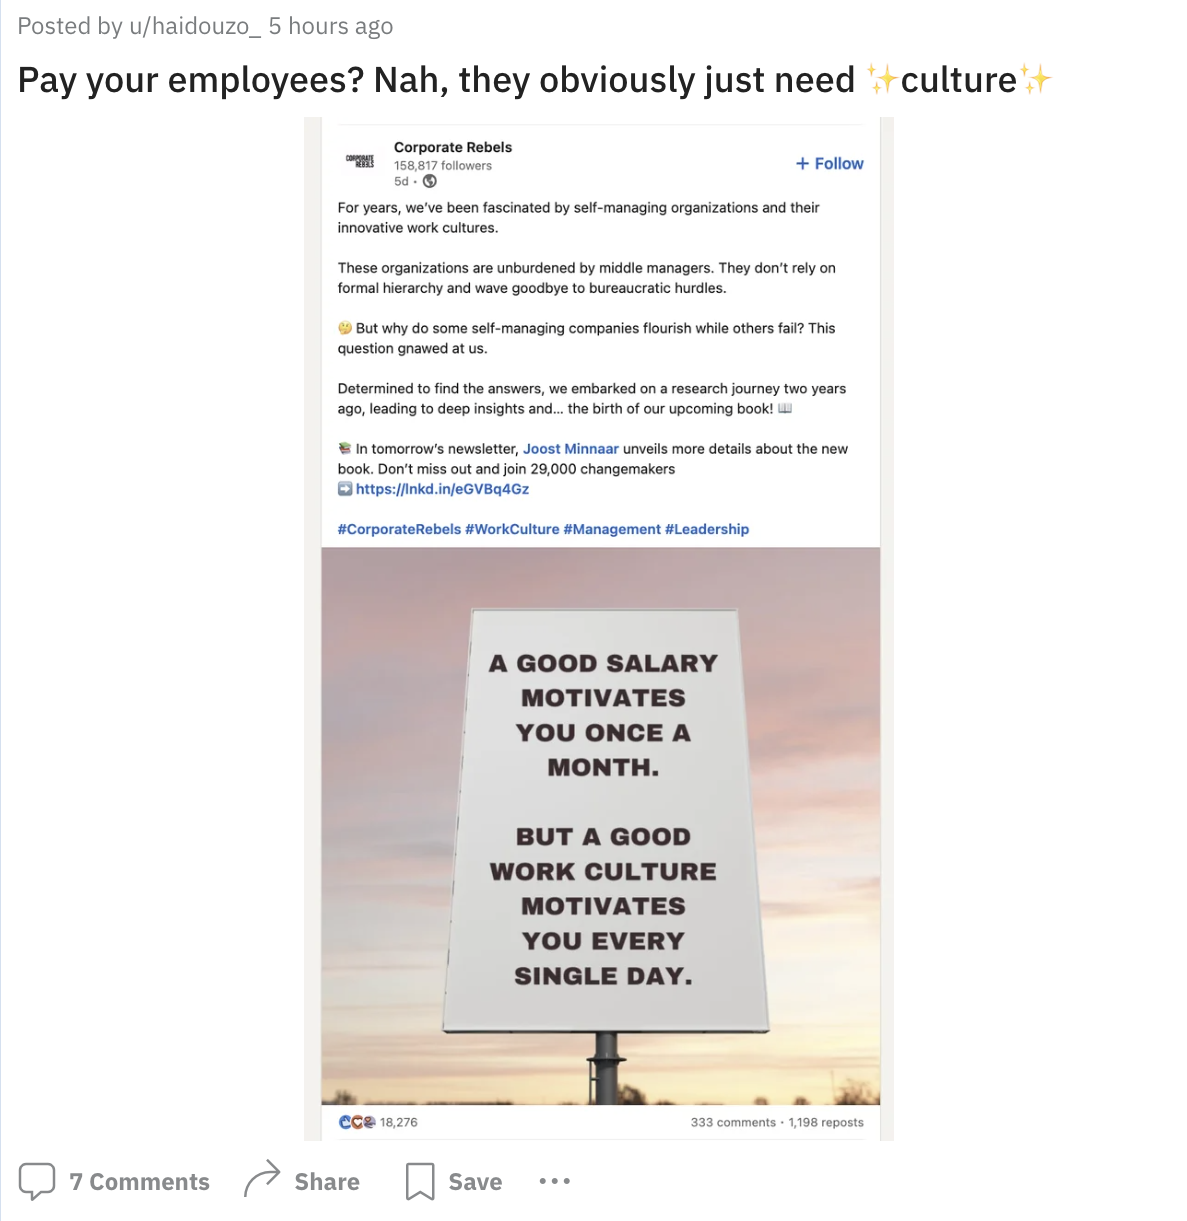 document - Posted by uhaidouzo 5 hours ago Pay your employees? Nah, they obviously just need culture Corporate Rebel For years, we've been fascinated by selfmanaging organizations and their innovative work cultures These organizations are unburdened by mi